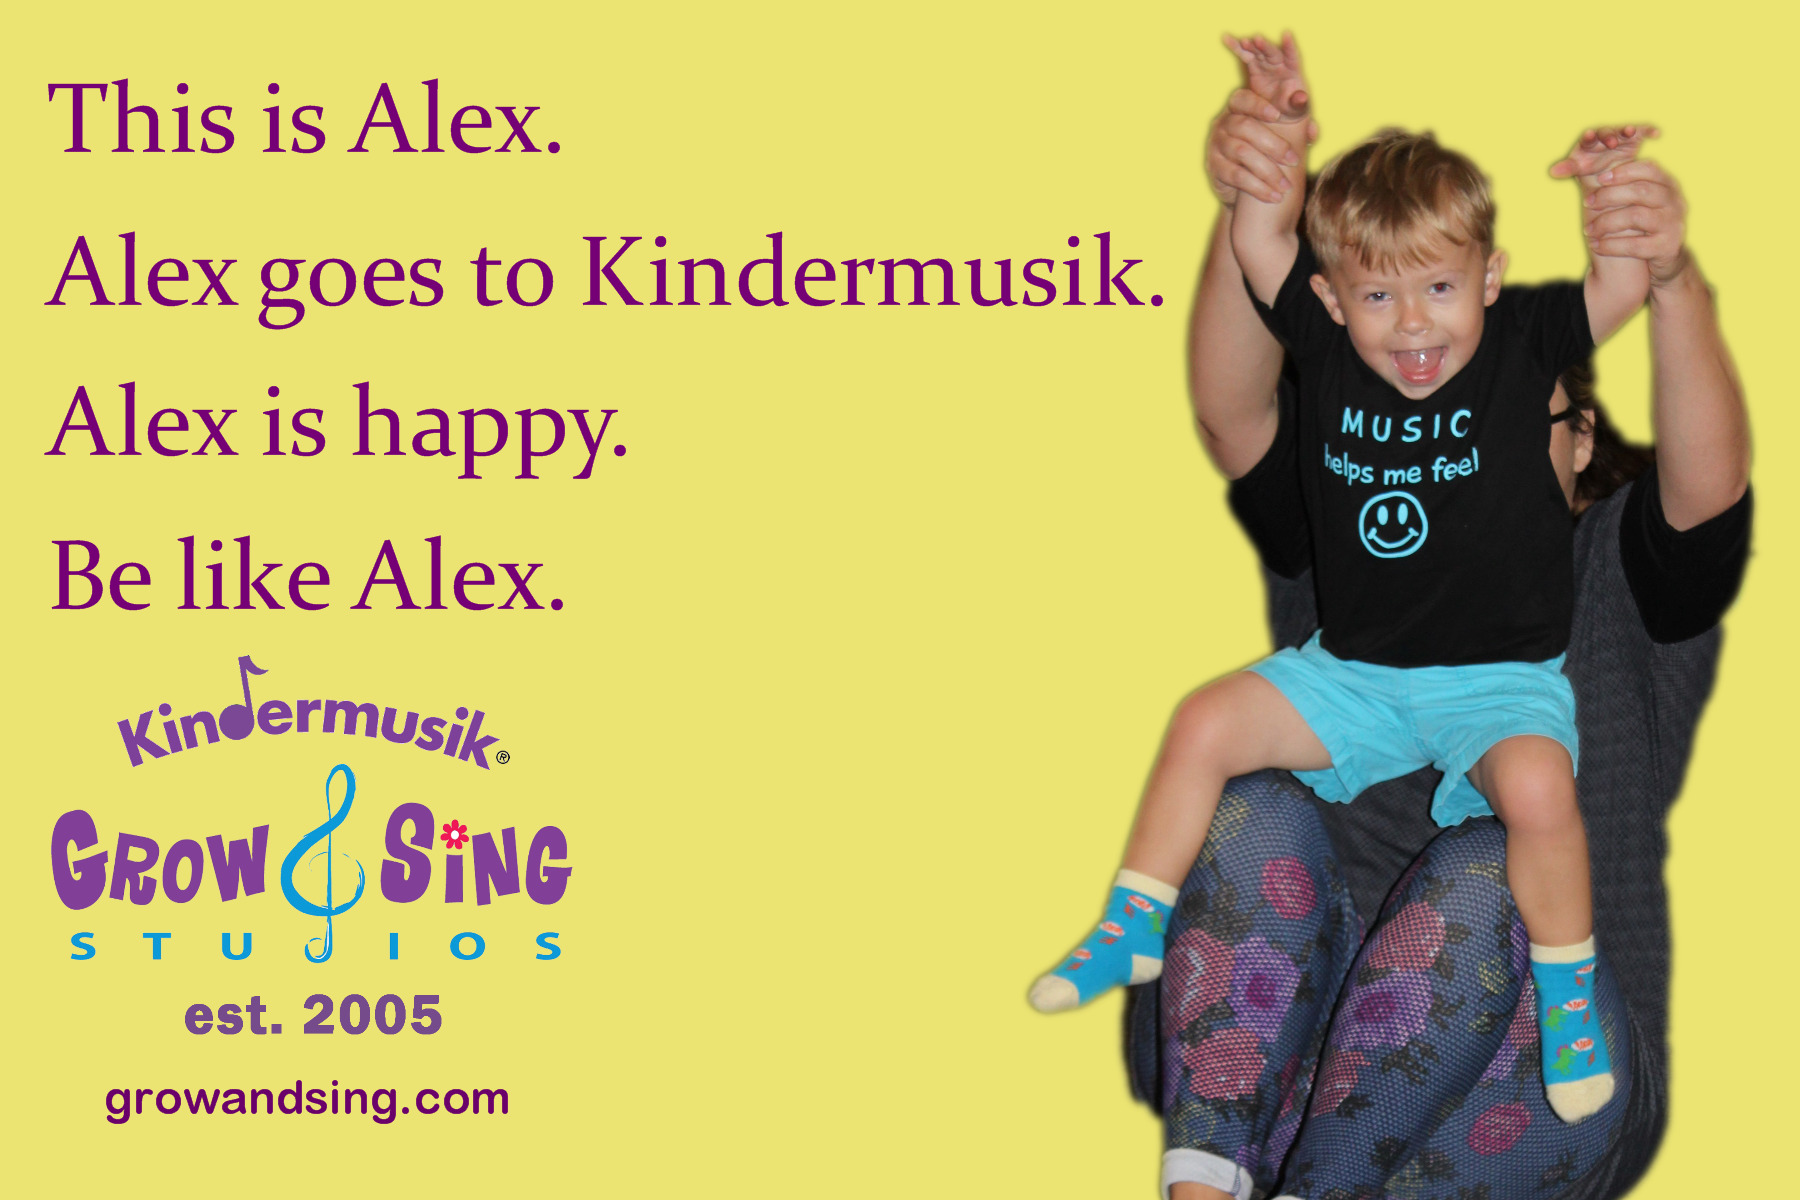 this is alex. alex goes to kindermusik. alex is happy. be like alex.